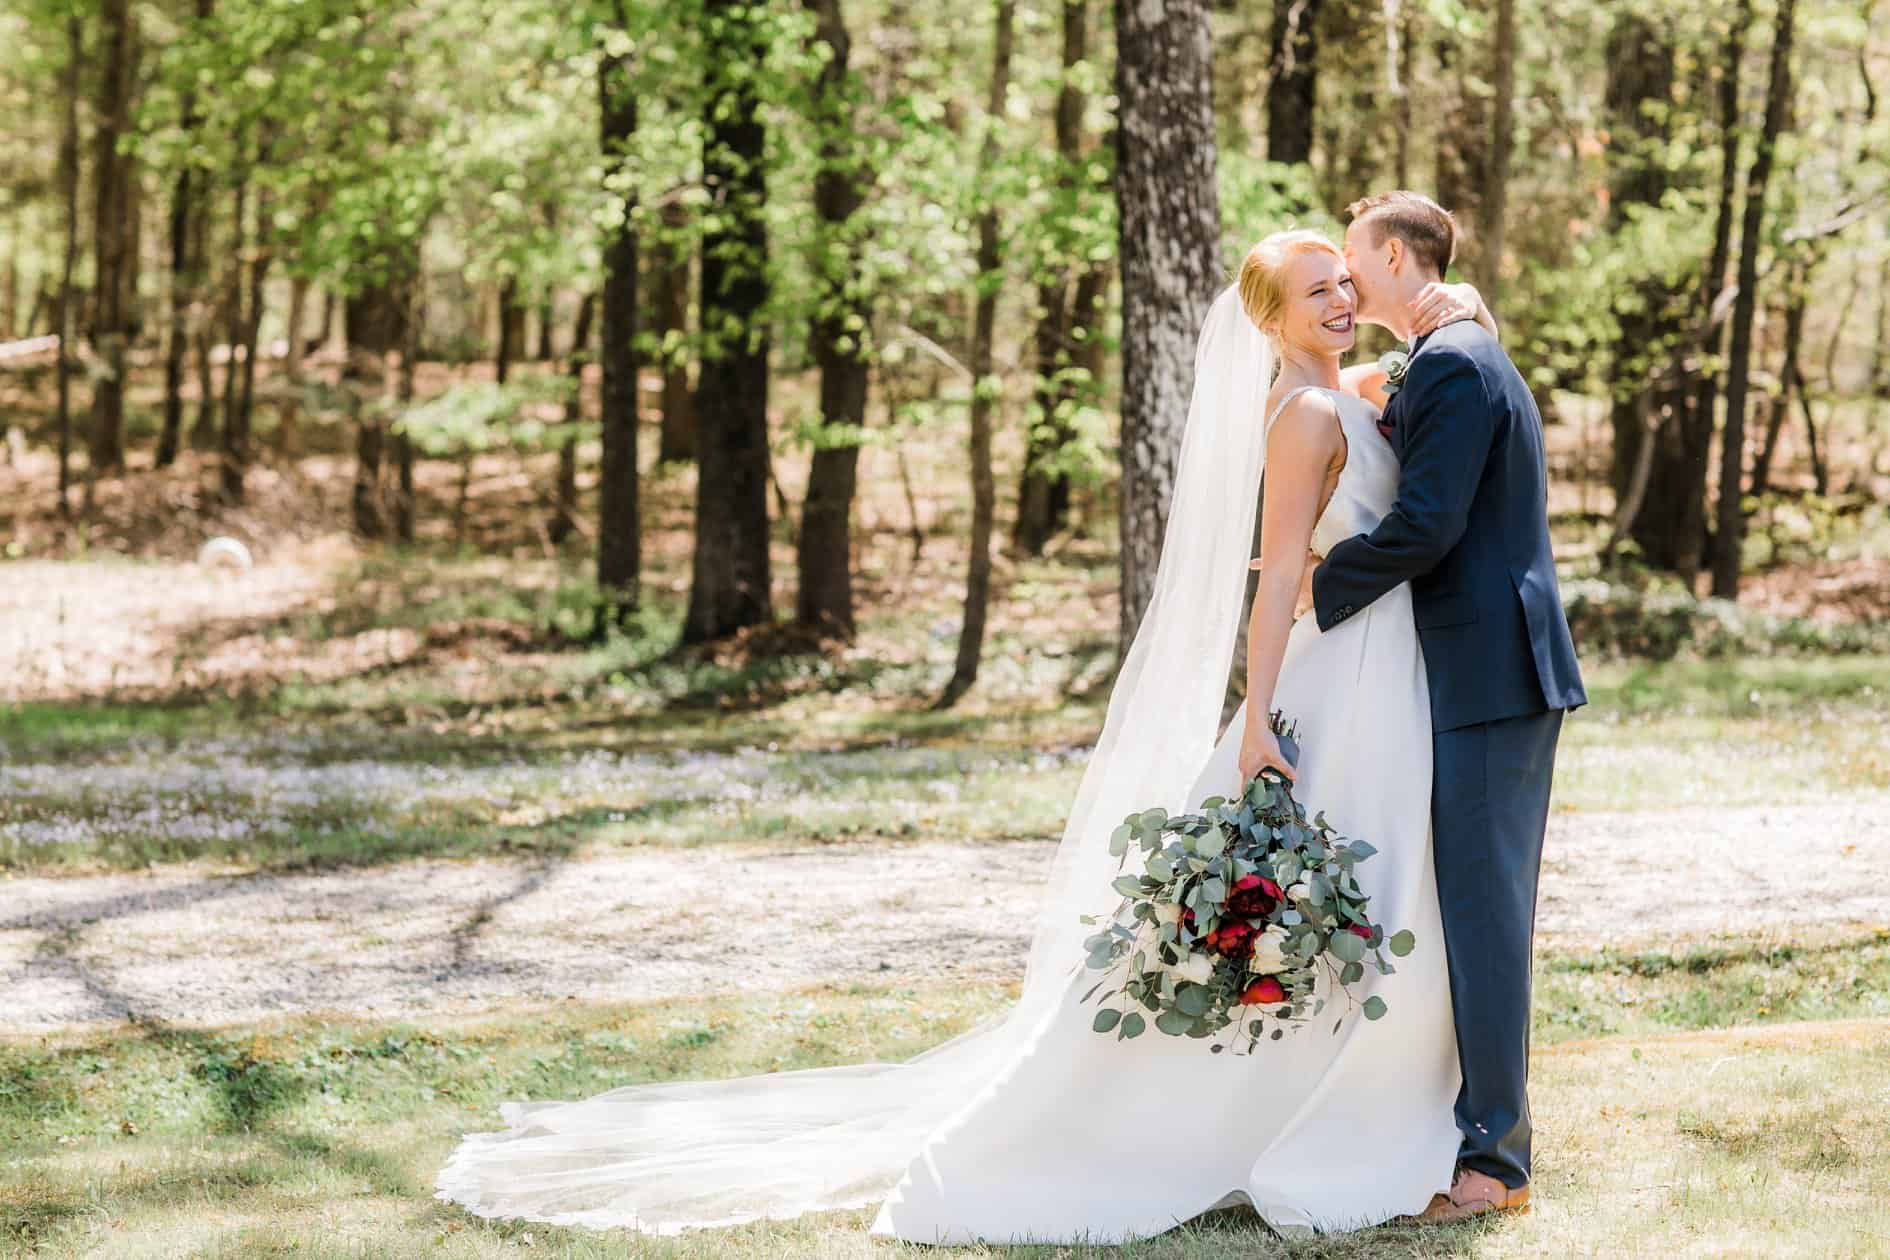 Bride and Groom Wedding Photography by Southern Rose Photography- Forever Bridal Wedding Shows